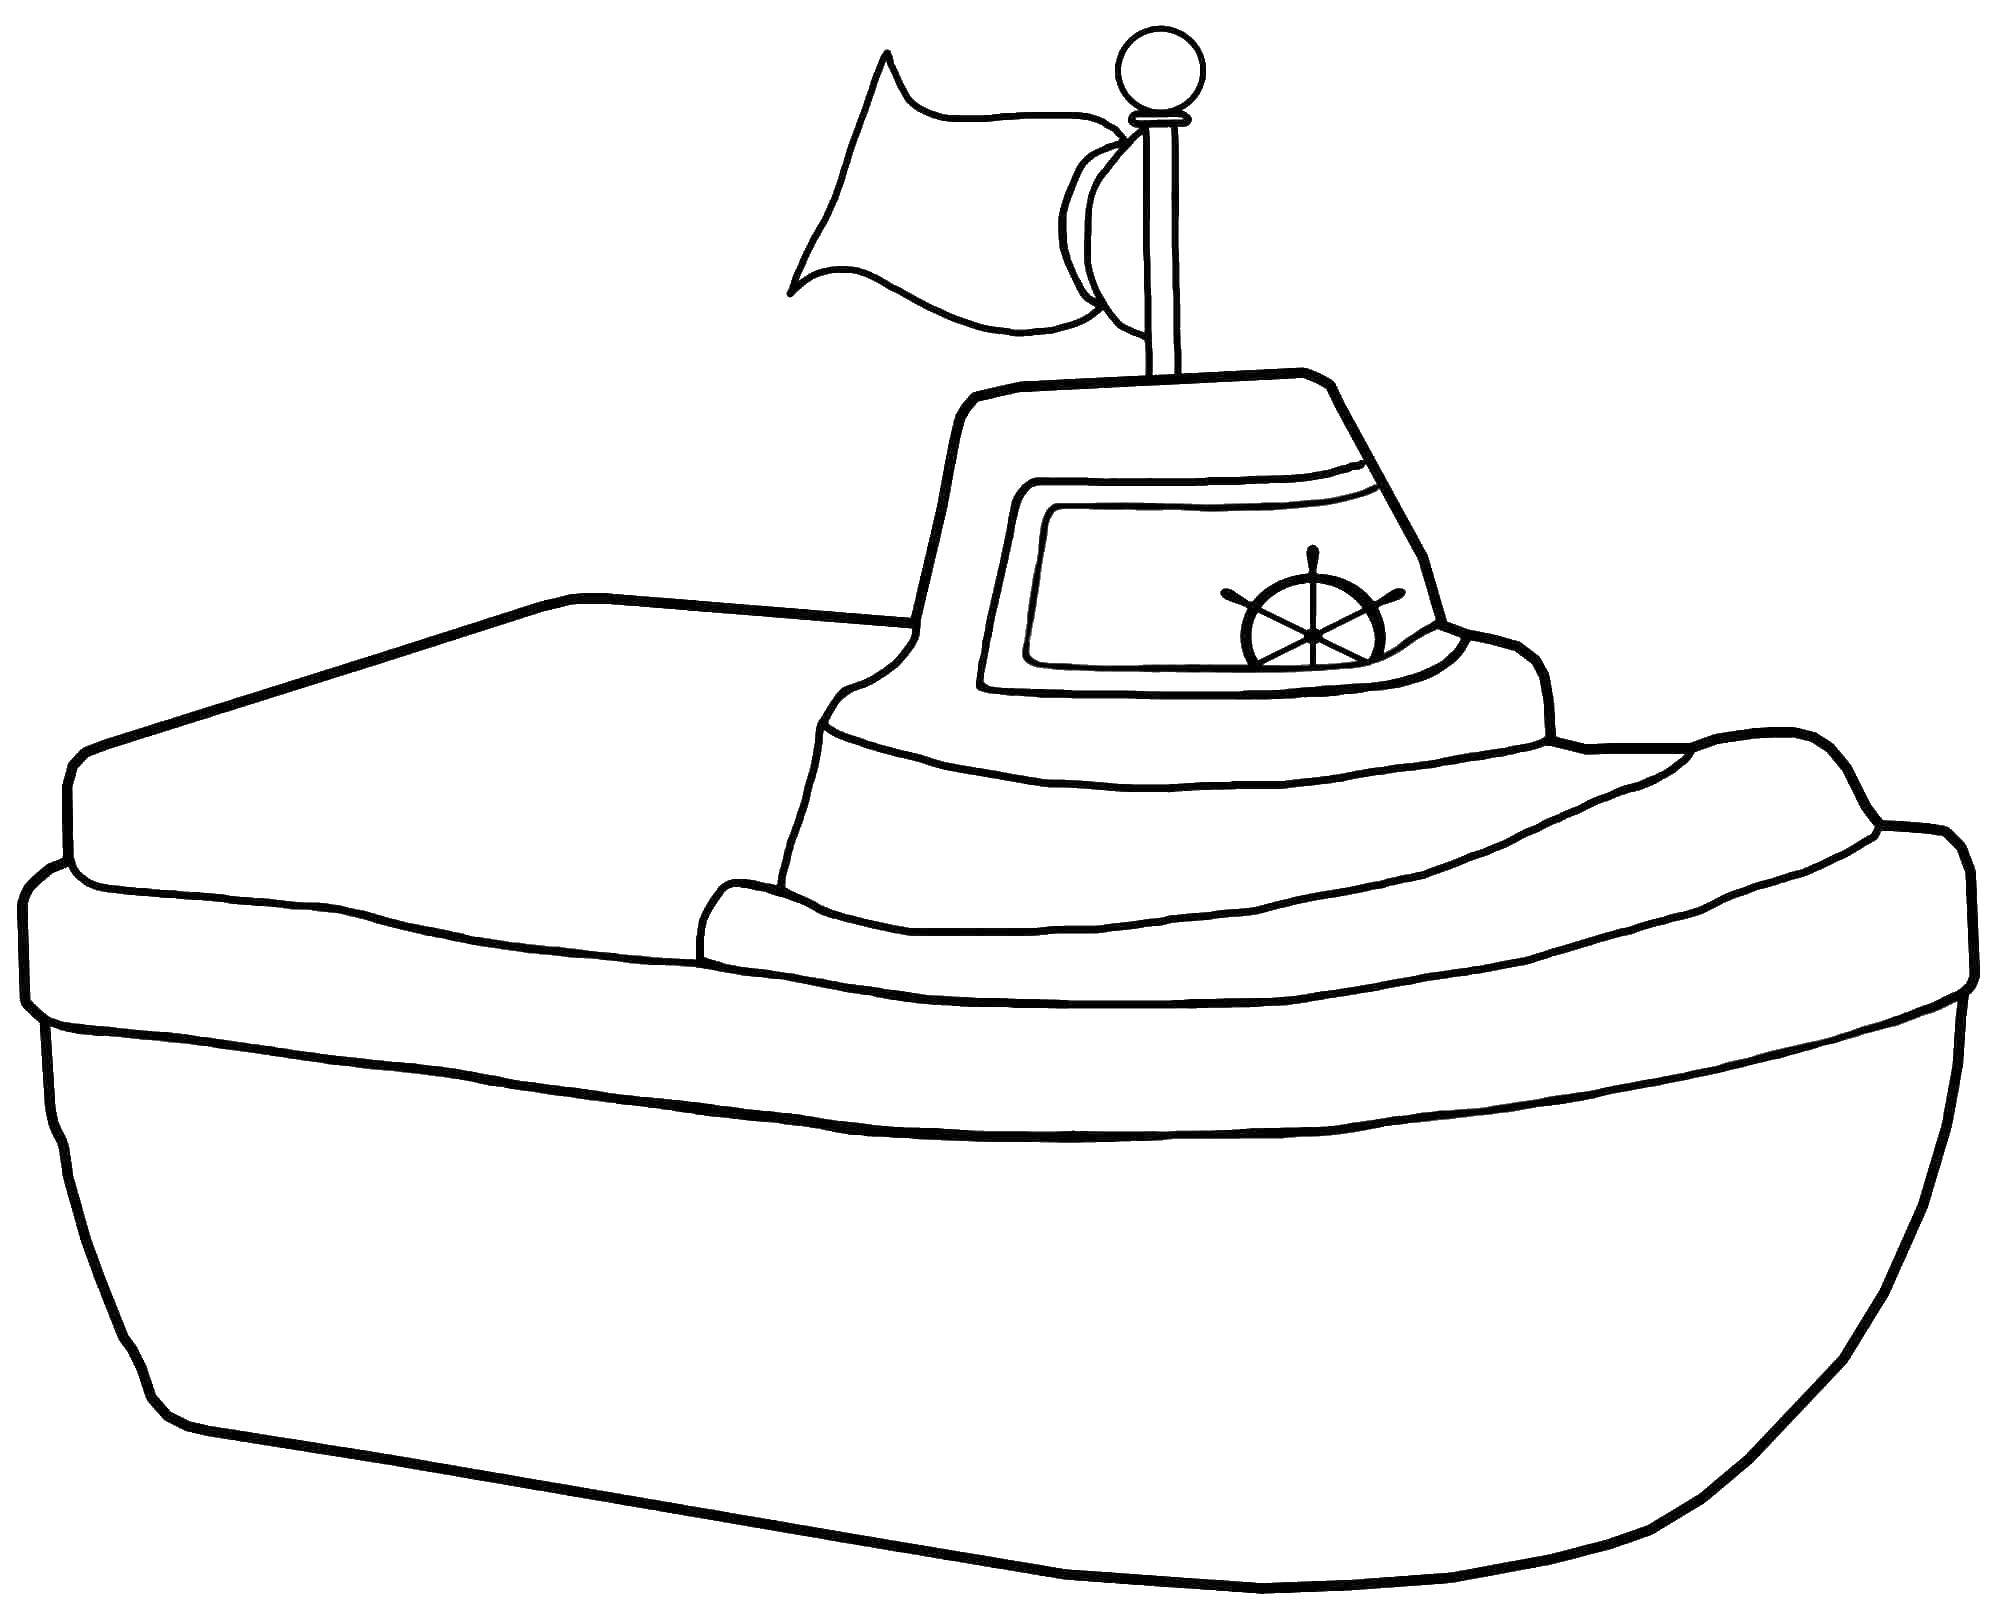 Coloring Yacht. Category ships. Tags:  ships, boats, yacht.